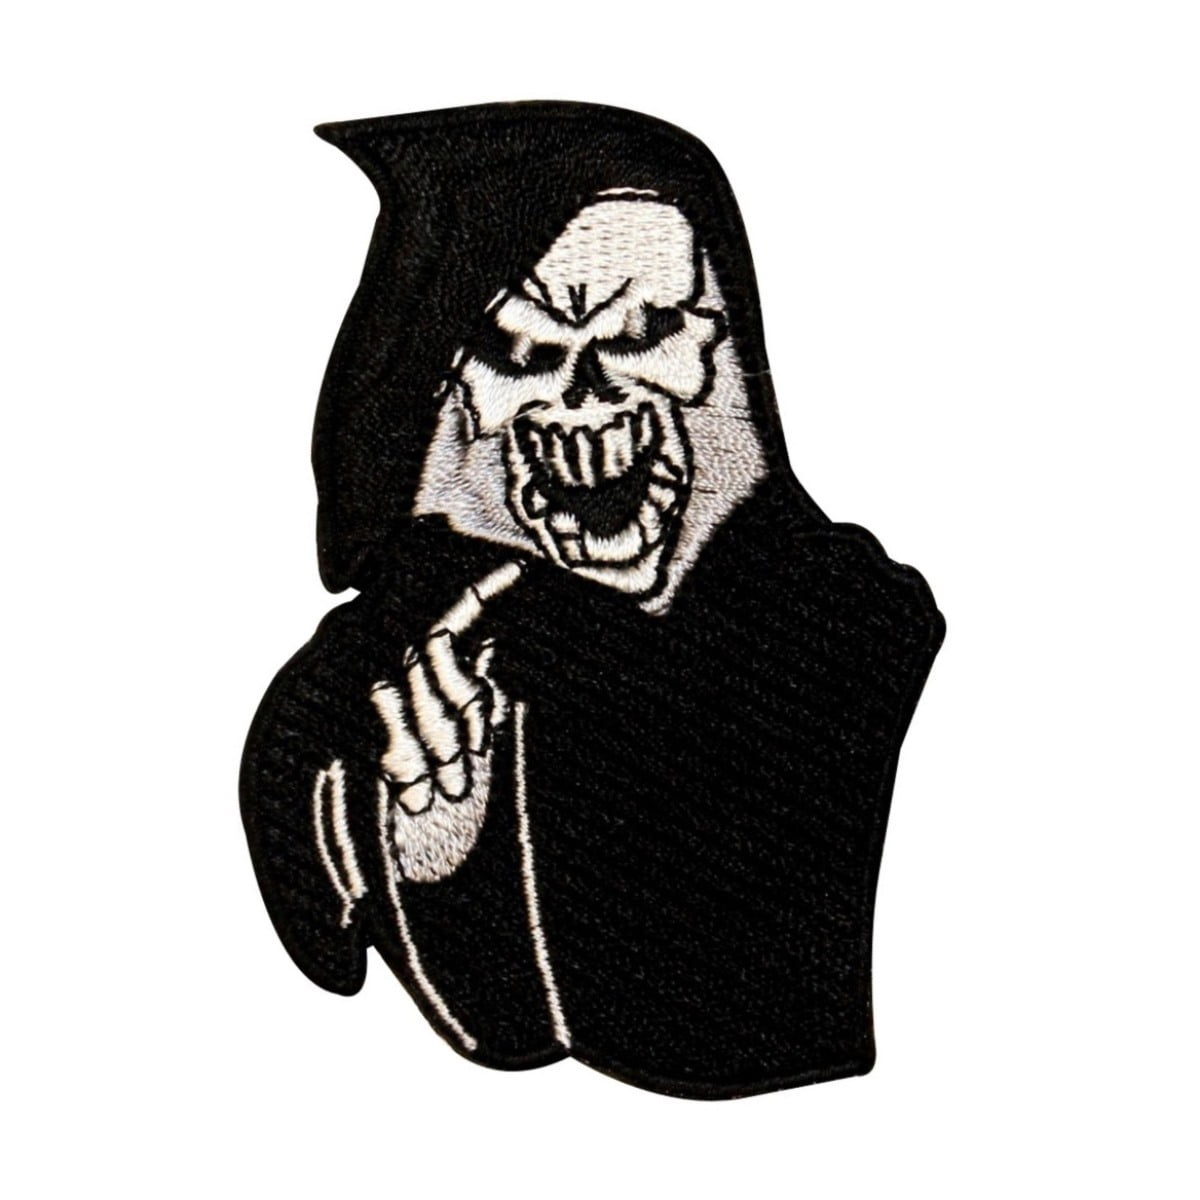 Large Grim Reaper Riding Motorcycle Flames Lightning Embroidered Biker Patch 